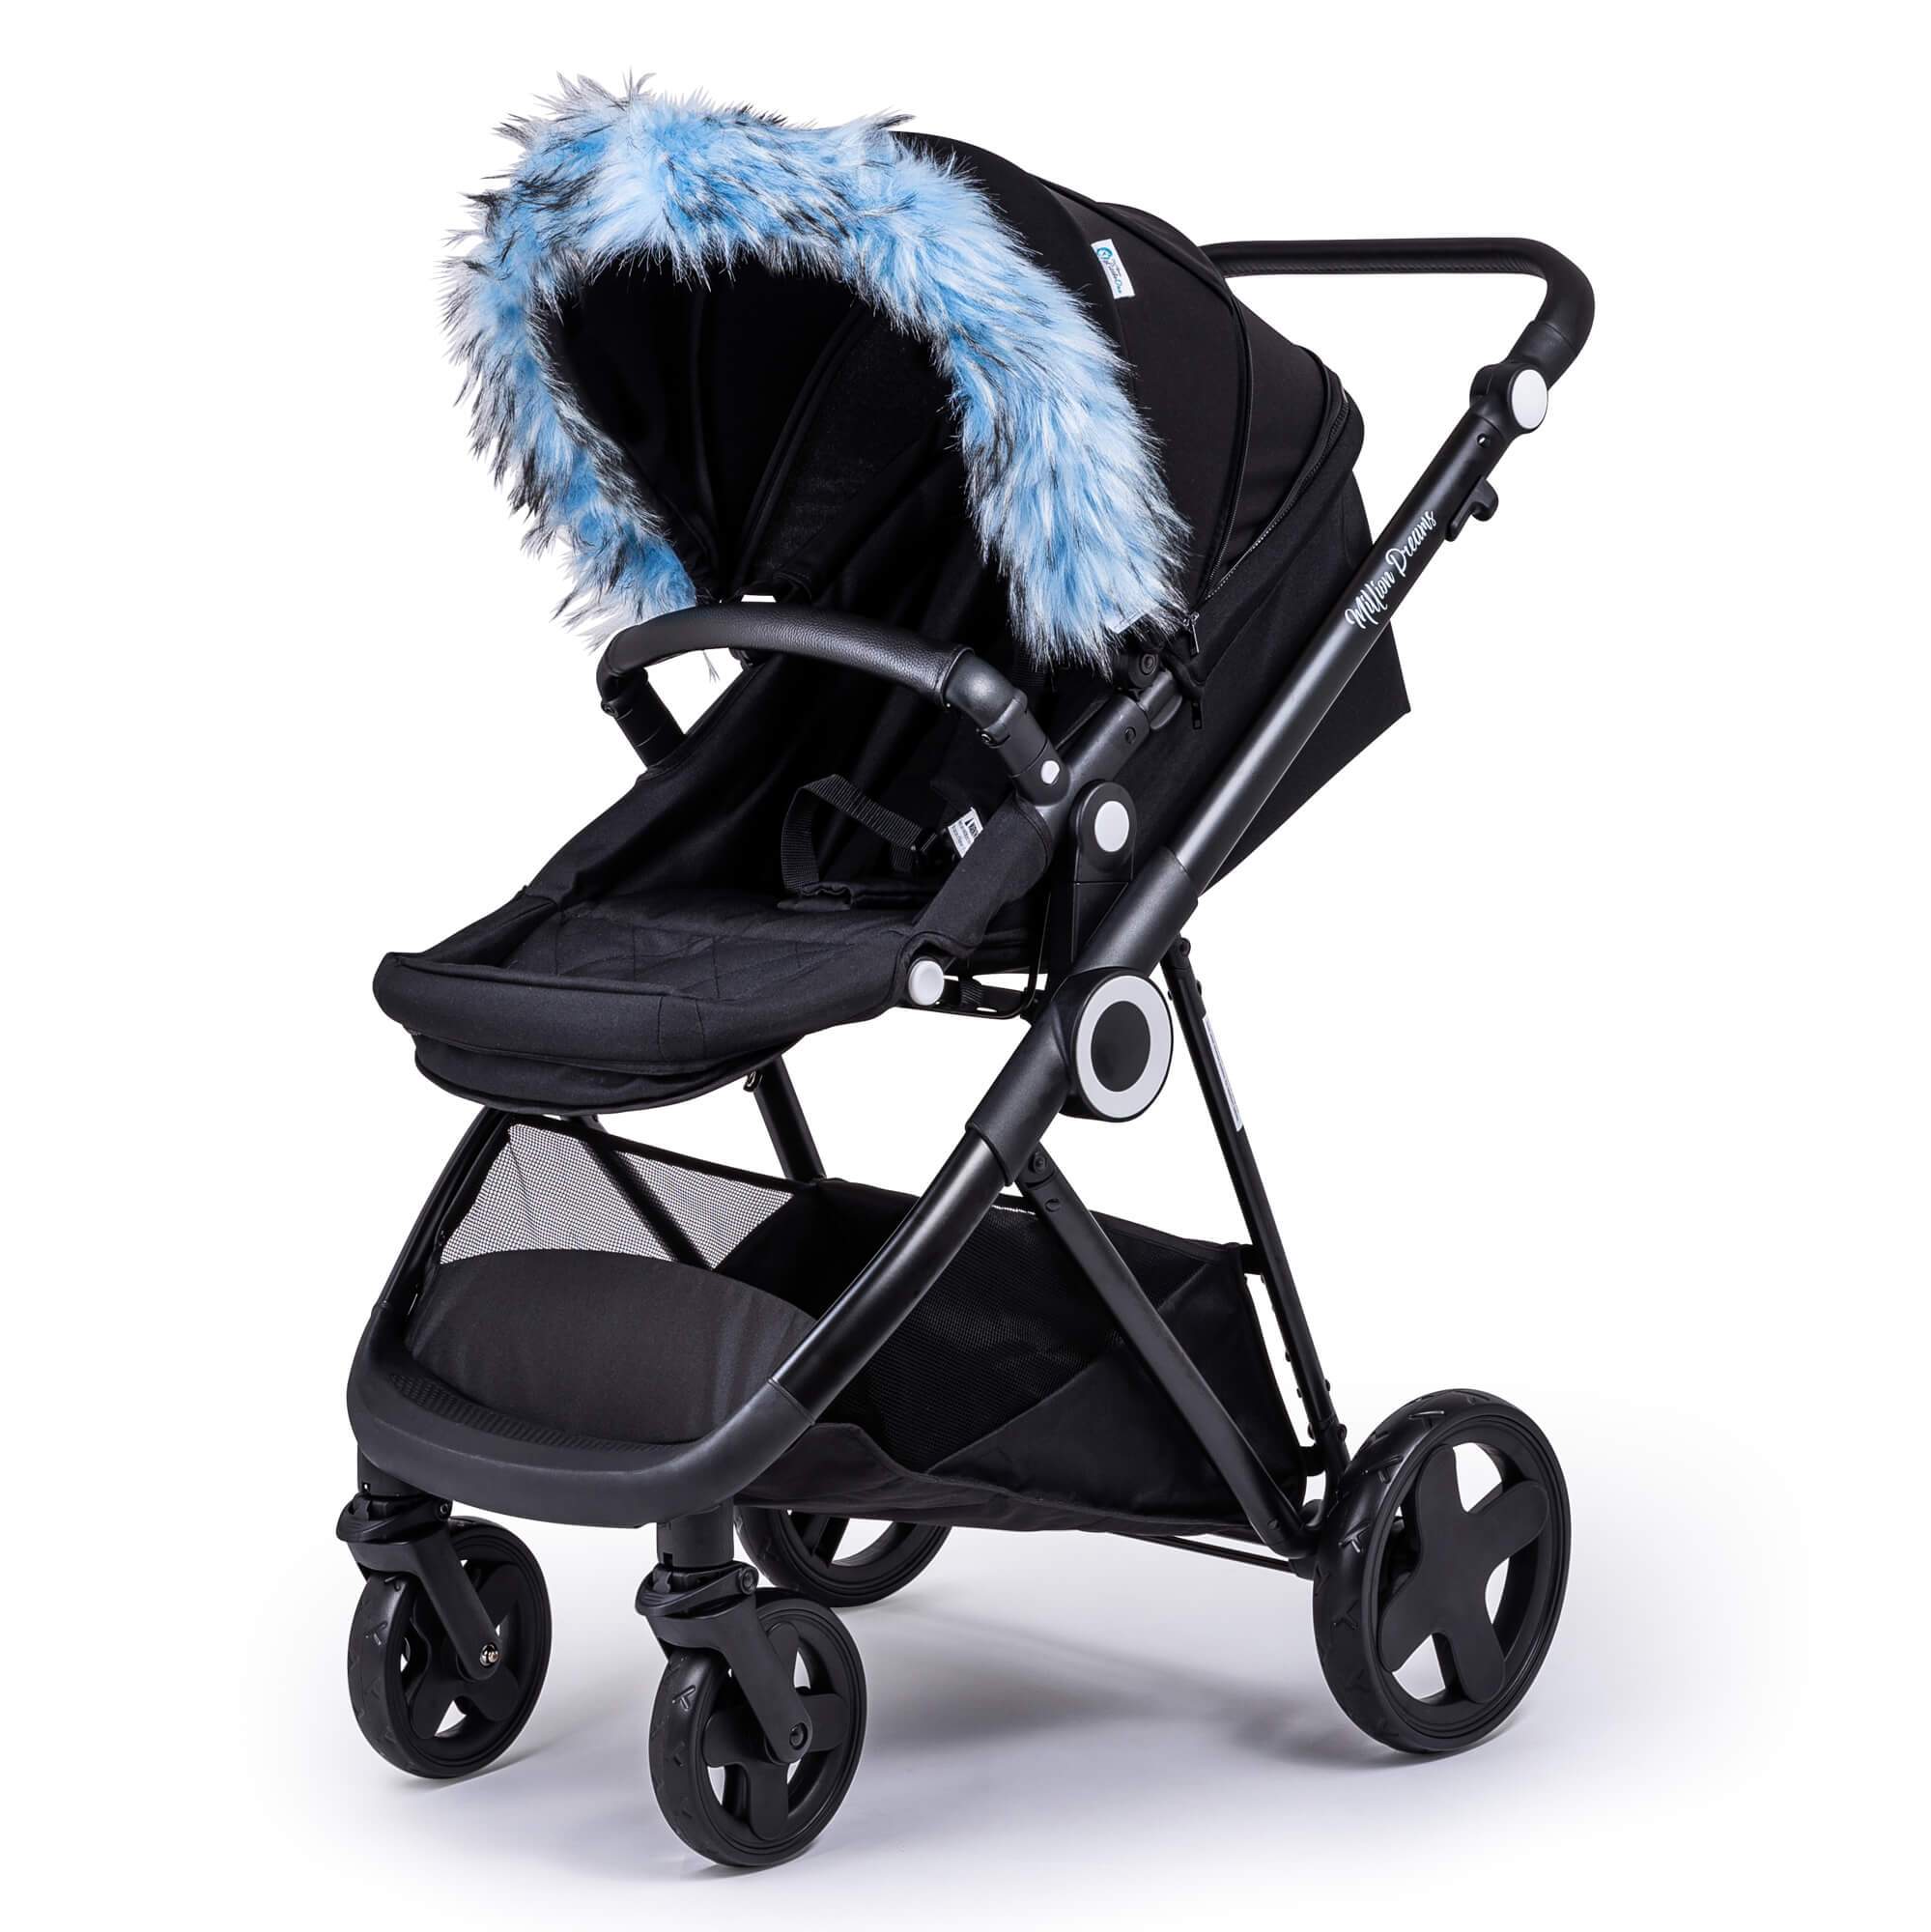 Pram Fur Hood Trim Attachment for Pushchair Compatible with Zooper - Light Blue / Fits All Models | For Your Little One